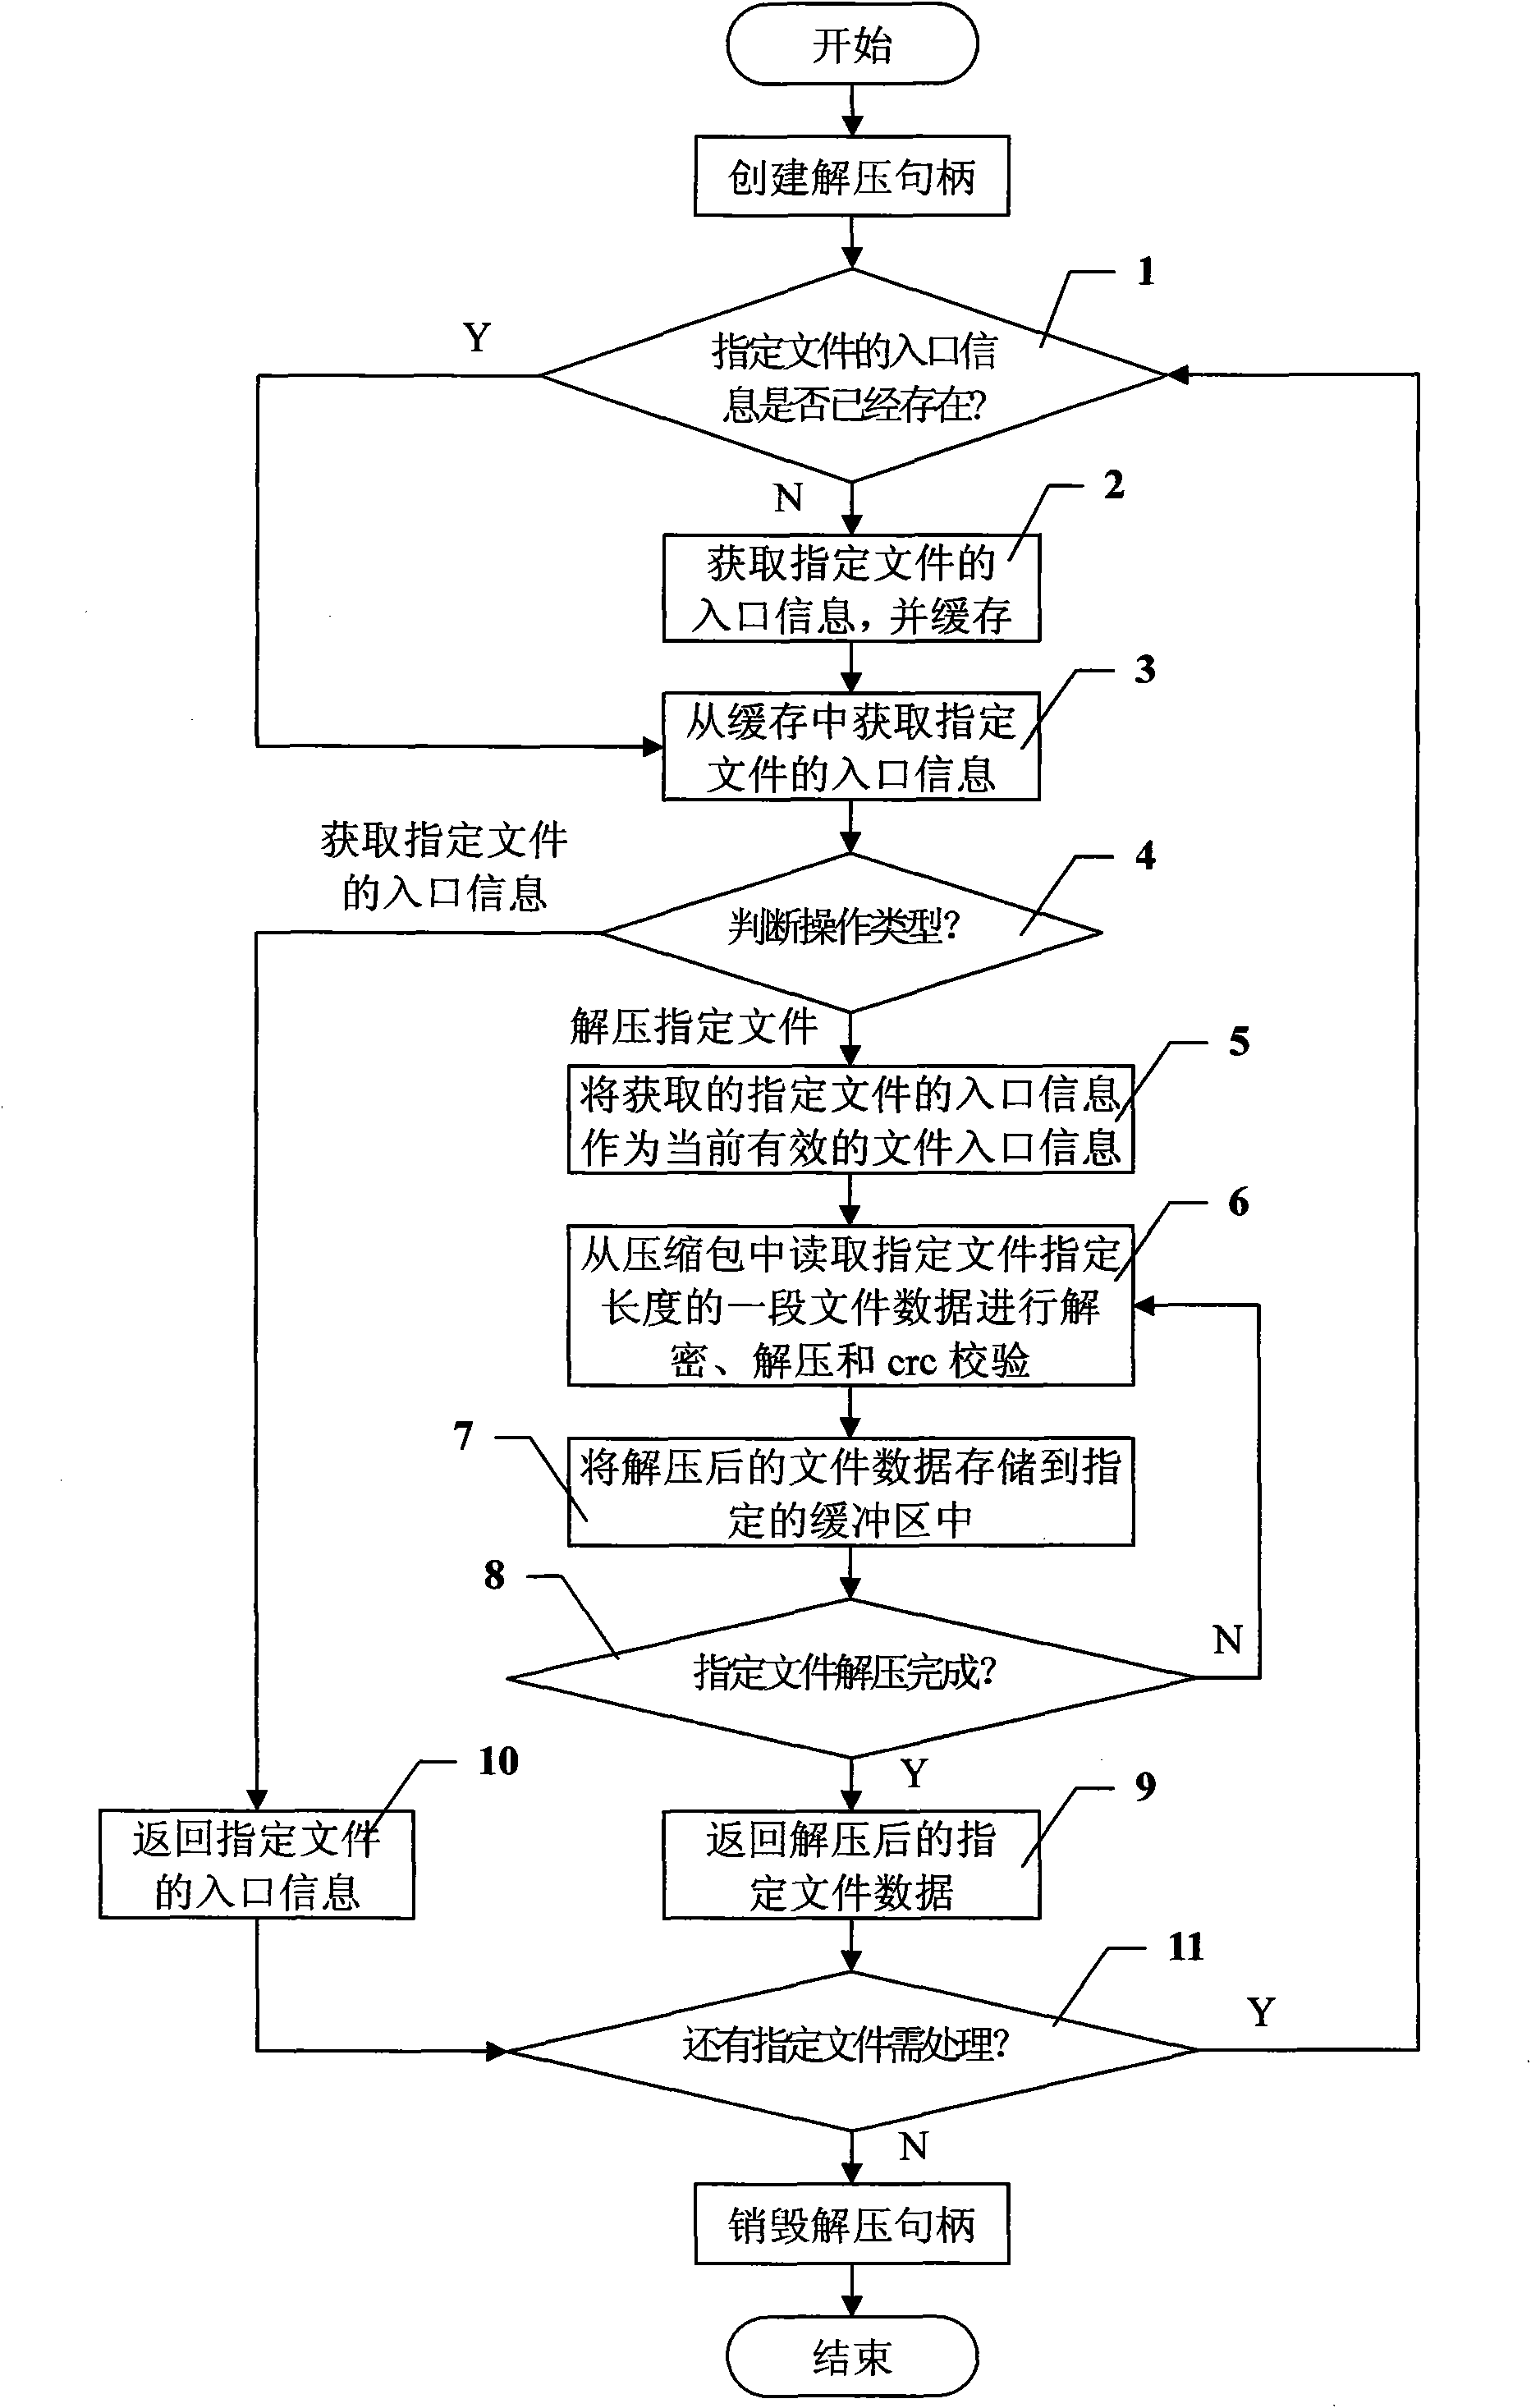 Method for decompressing large-data-volume package in mobile rich media application